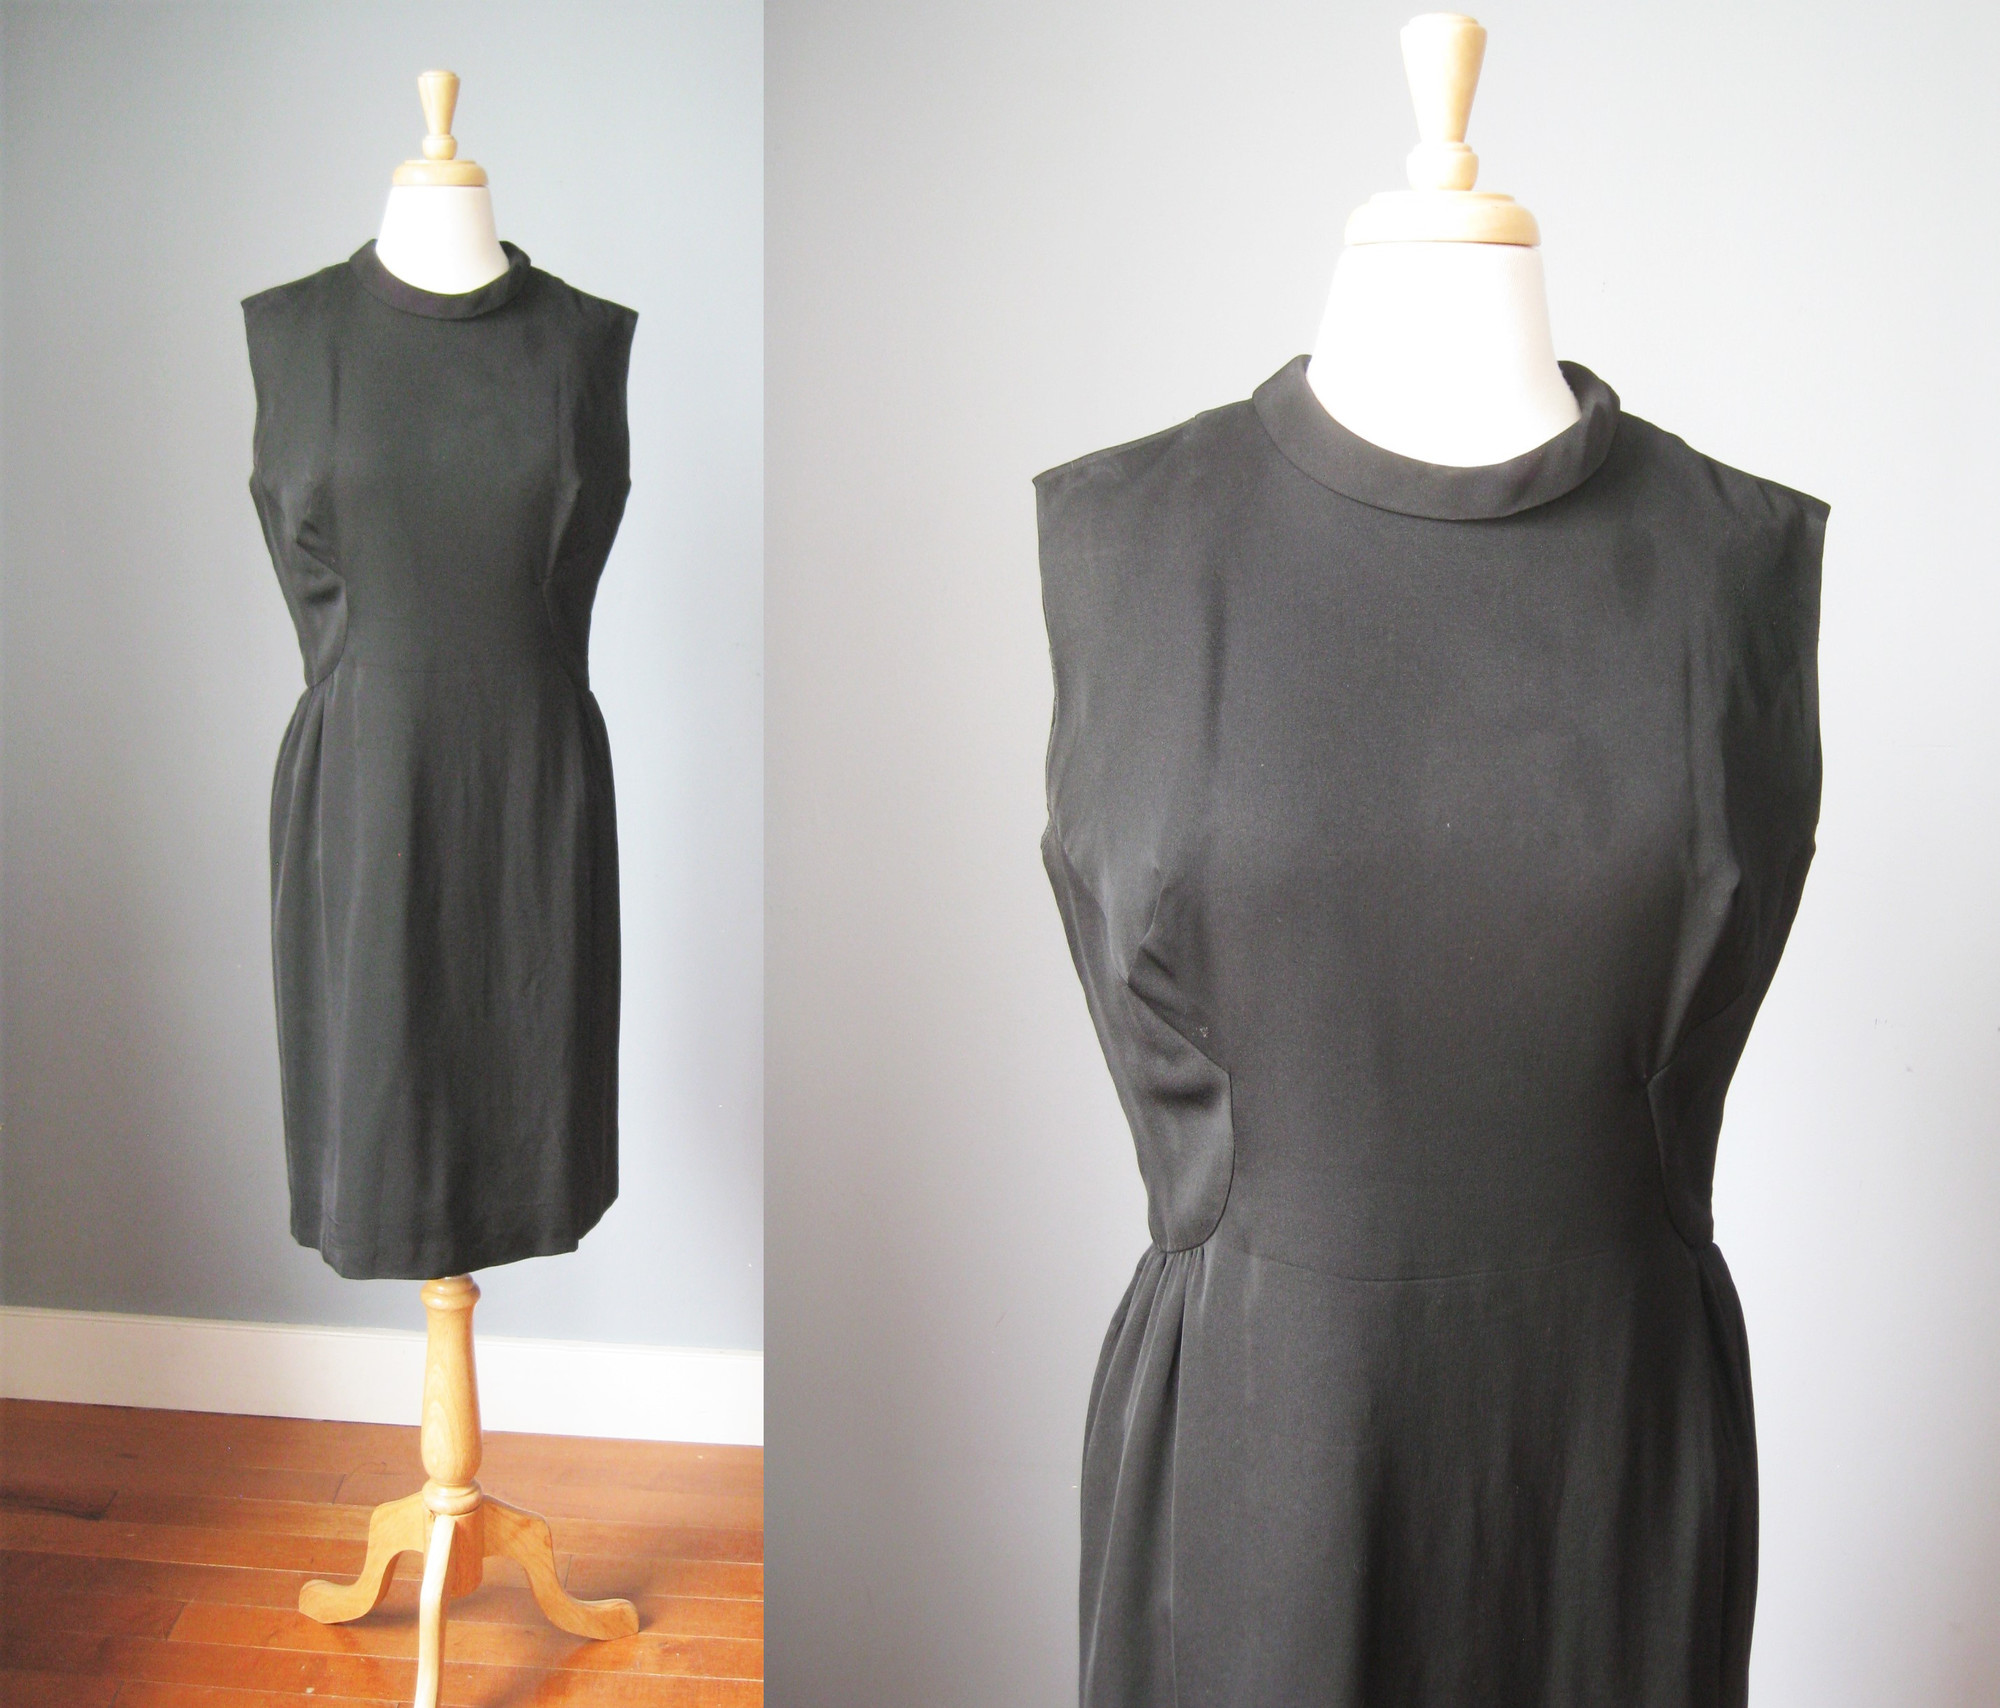 Super simple and timeless little black dress from the 60s
Beautifully made
sleeveless
flat measurements:
armpit to armpit: 20in
waist: 17inin
hip:21 1/4in
length: 39in
excellent vintage condition.

thanks for looking!
#9413